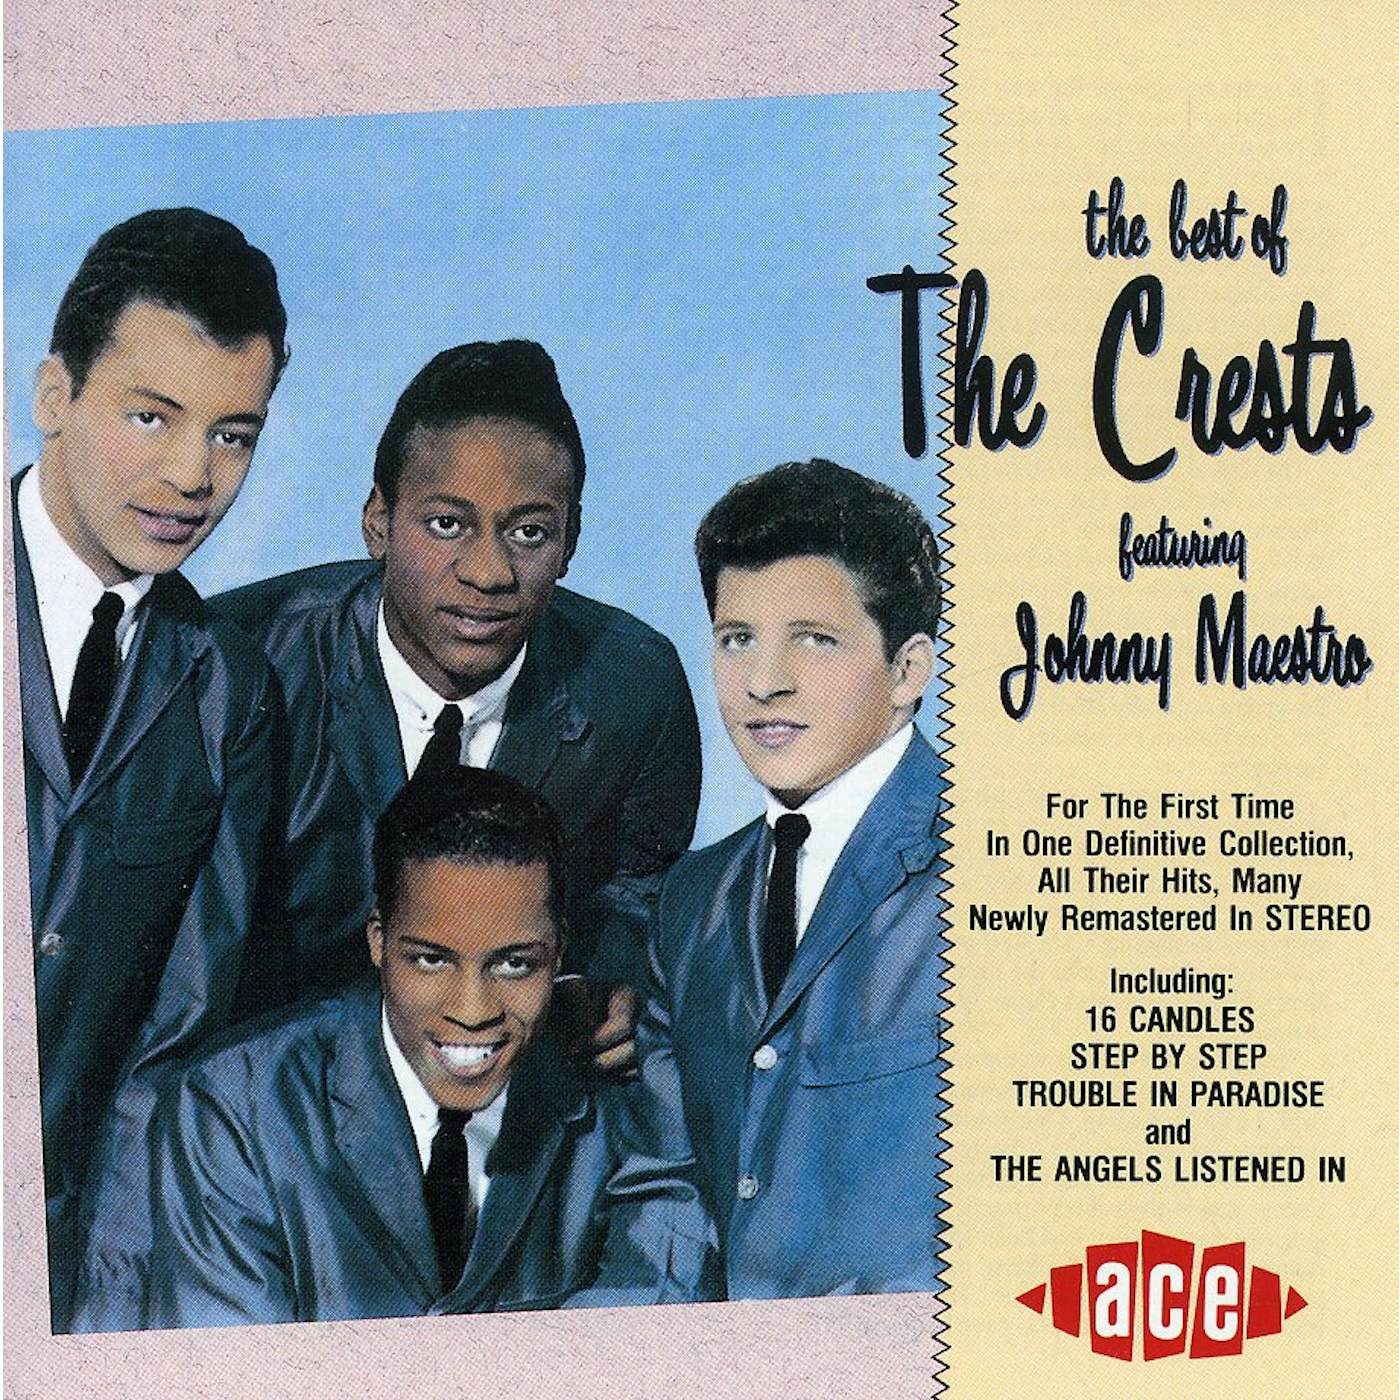 BEST OF The Crests FEATURING JOHNNY MAESTRO CD